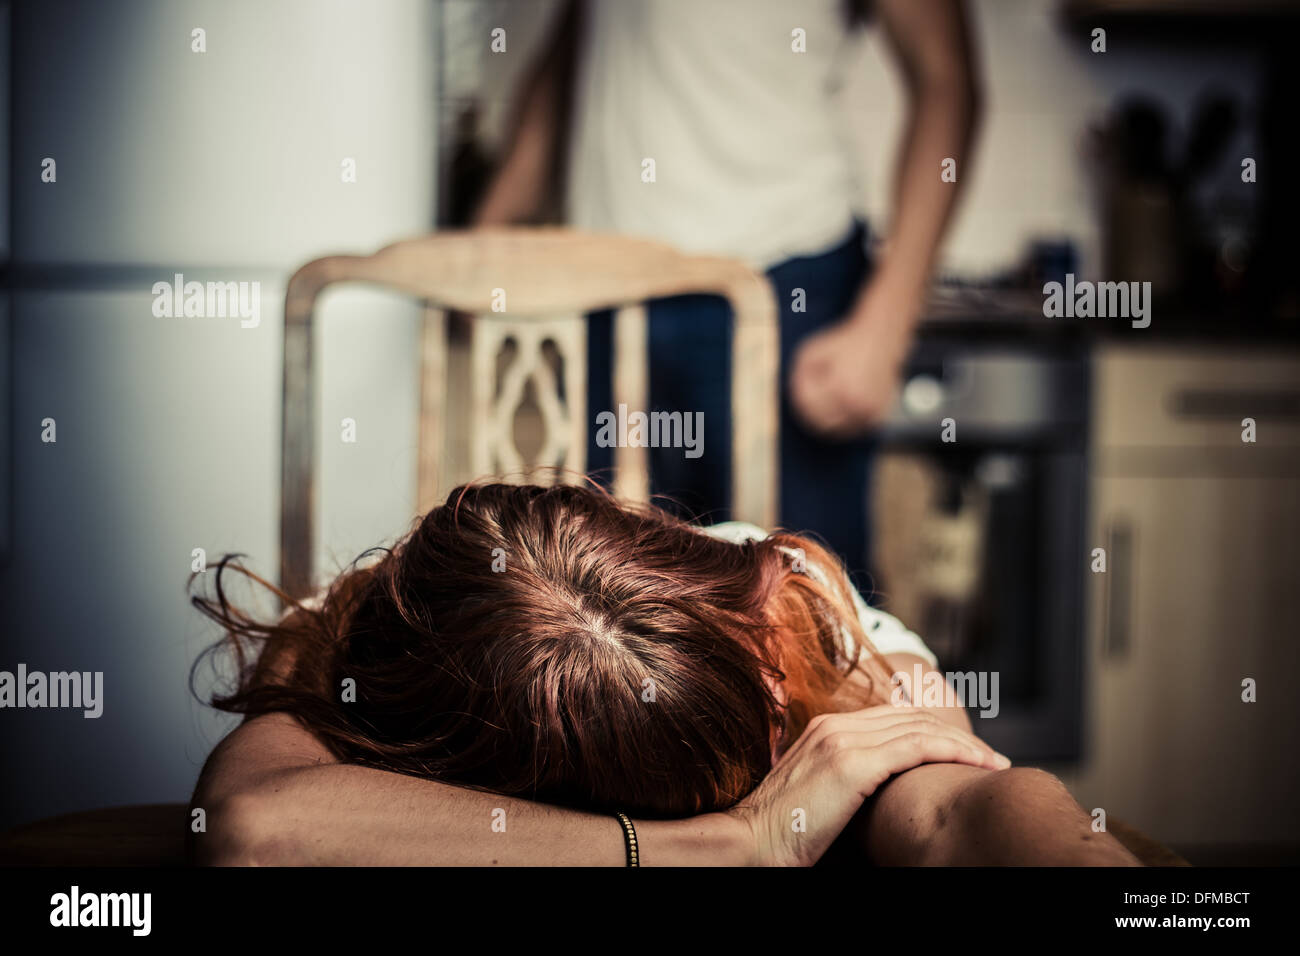 Young woman at table with abusive partner in background Stock Photo